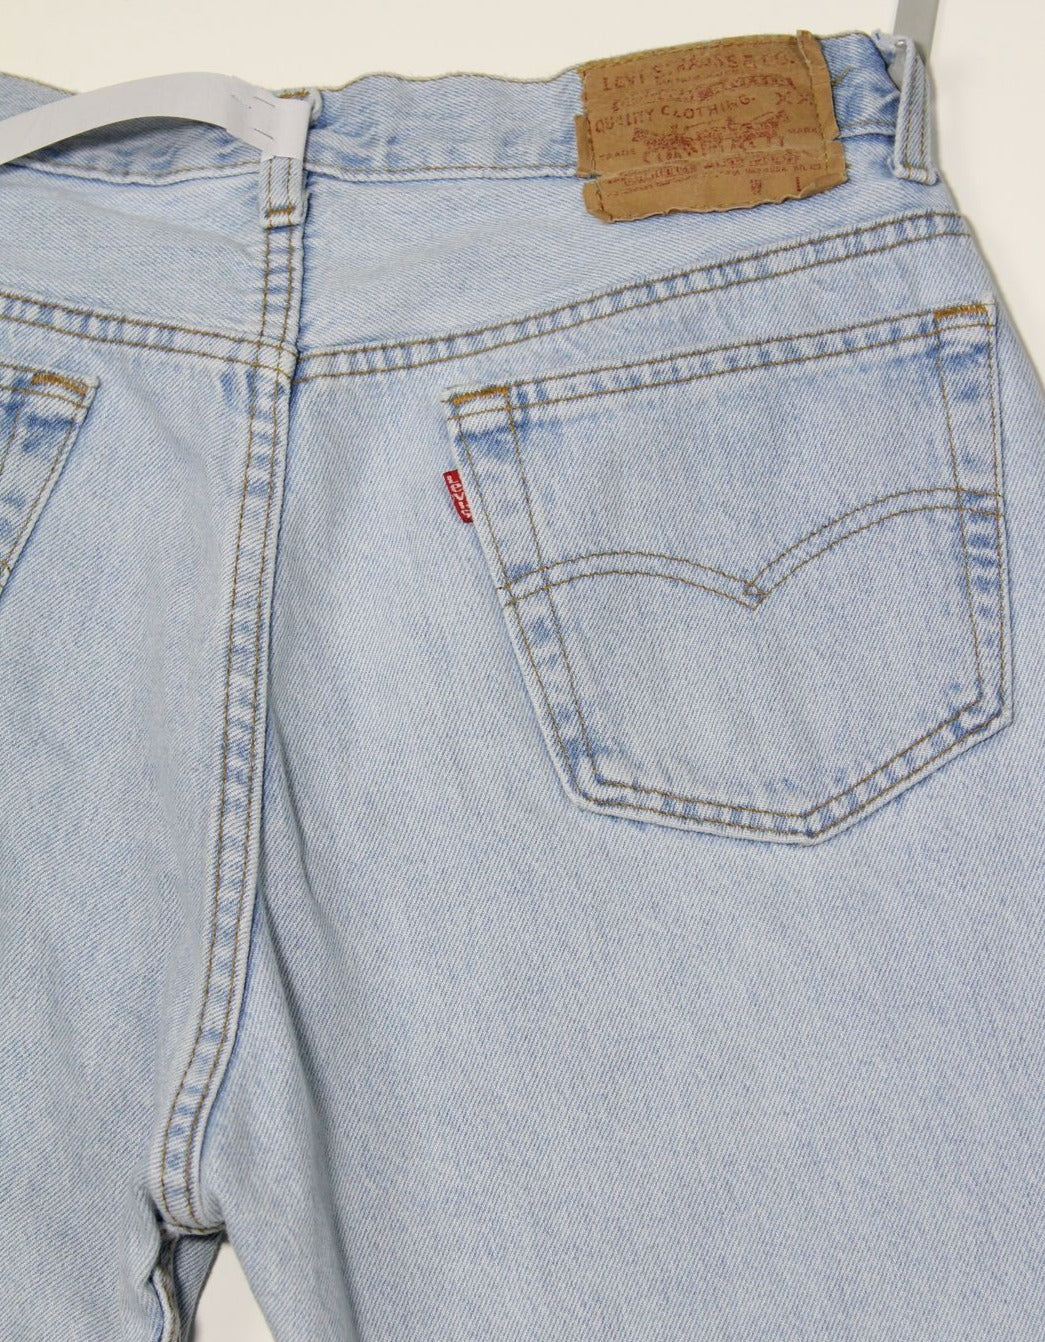 Levi's 501 Made In USA W34 L34 Jeans Vintage